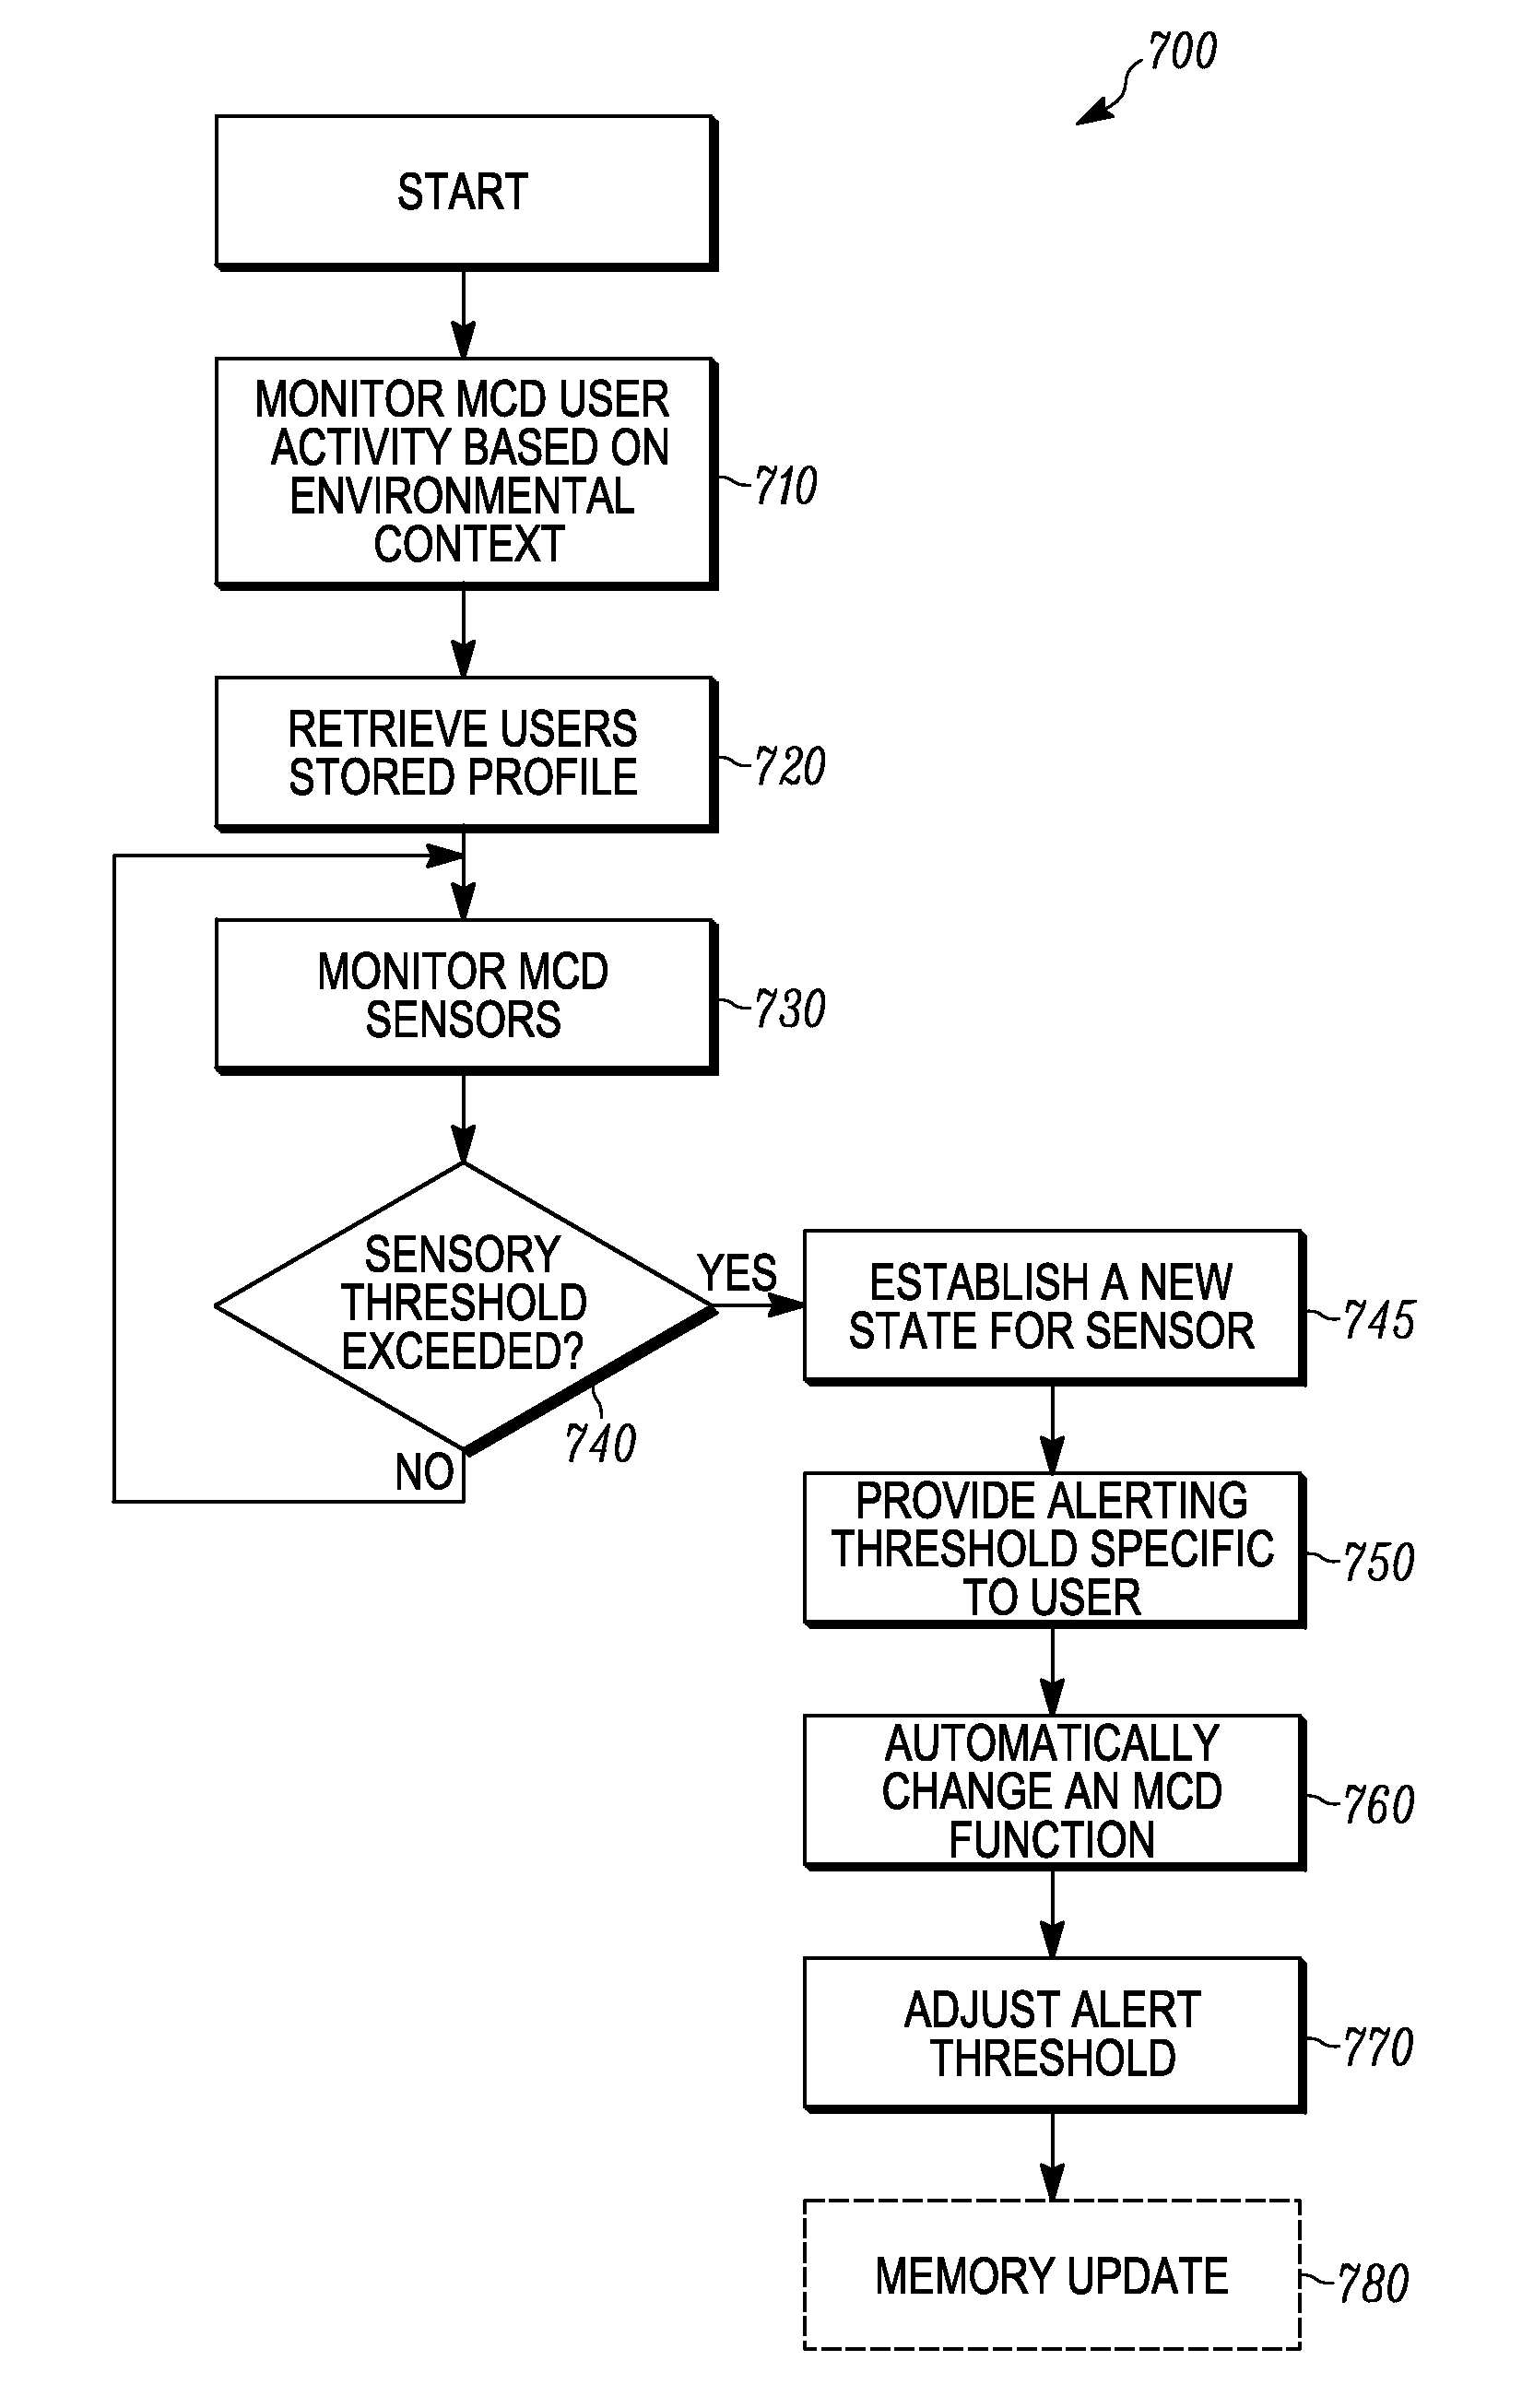 Method for adapting a mobile communication device's function to monitored activity and a user's profile